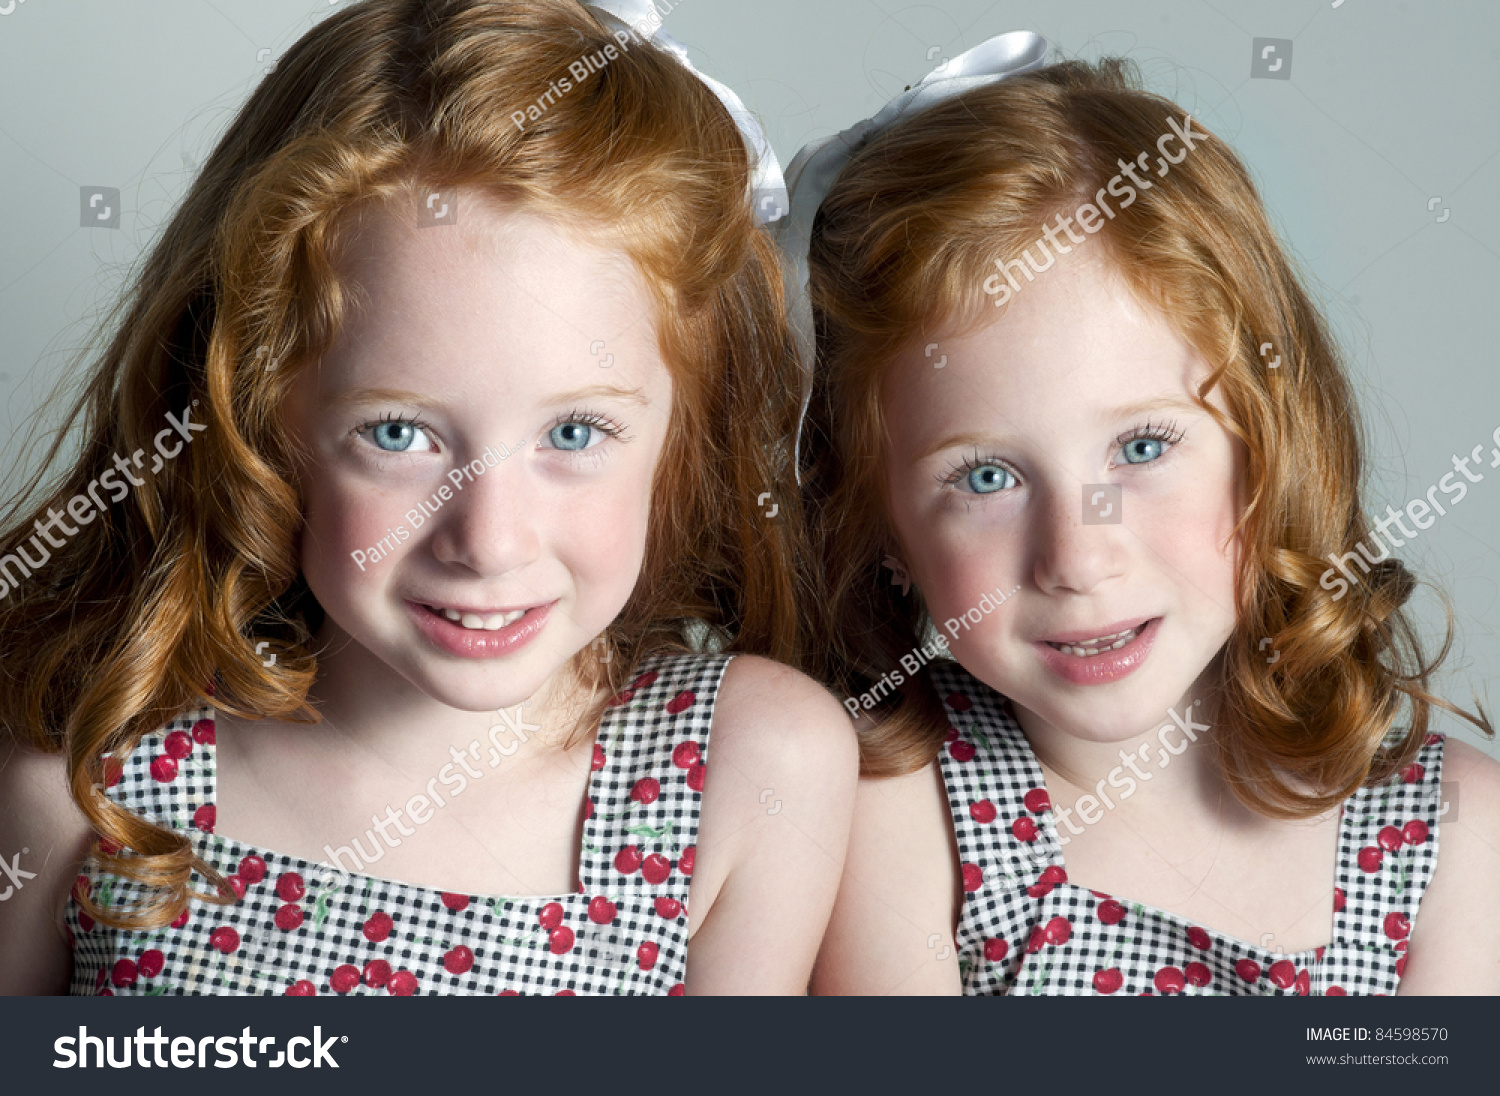 Twin Little Girls With Red Hair And Blue Eyes Stock Photo 84598570 ...